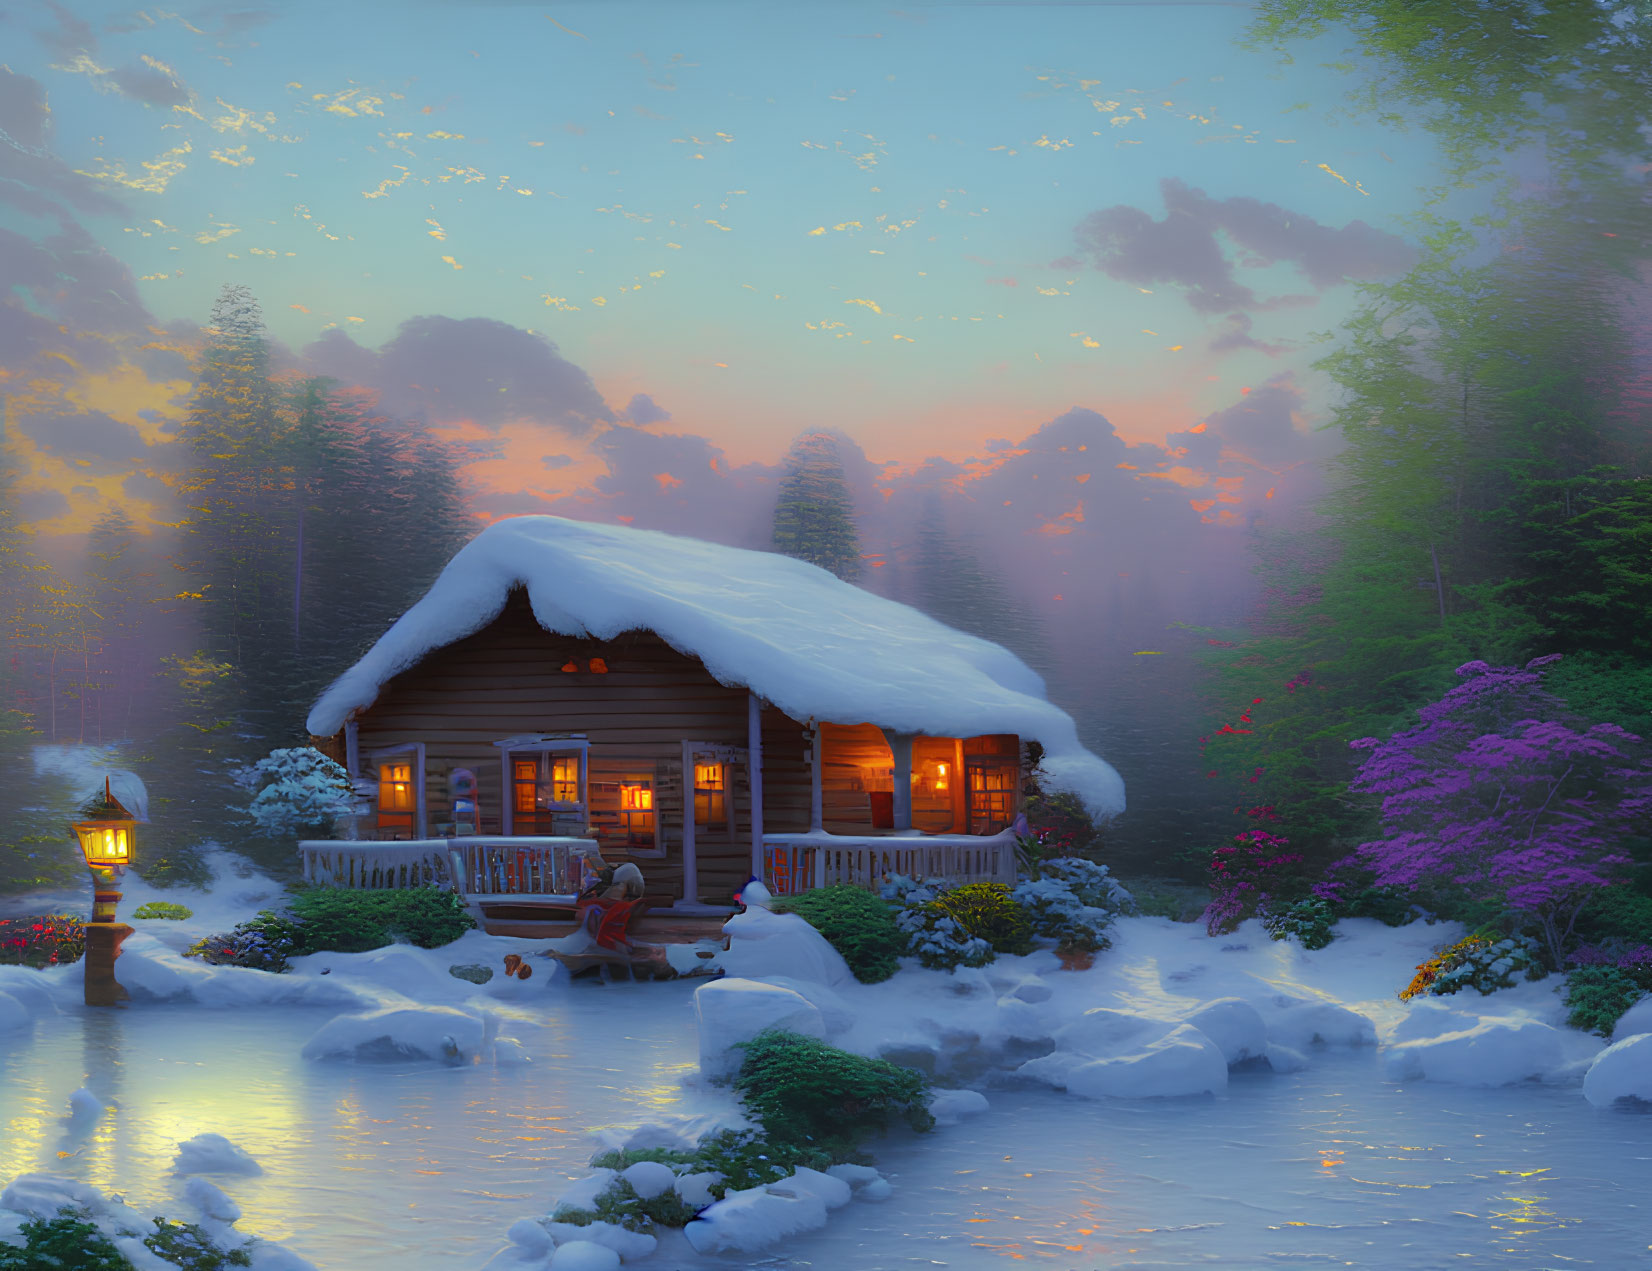 Snow-covered log cabin in tranquil winter evening setting